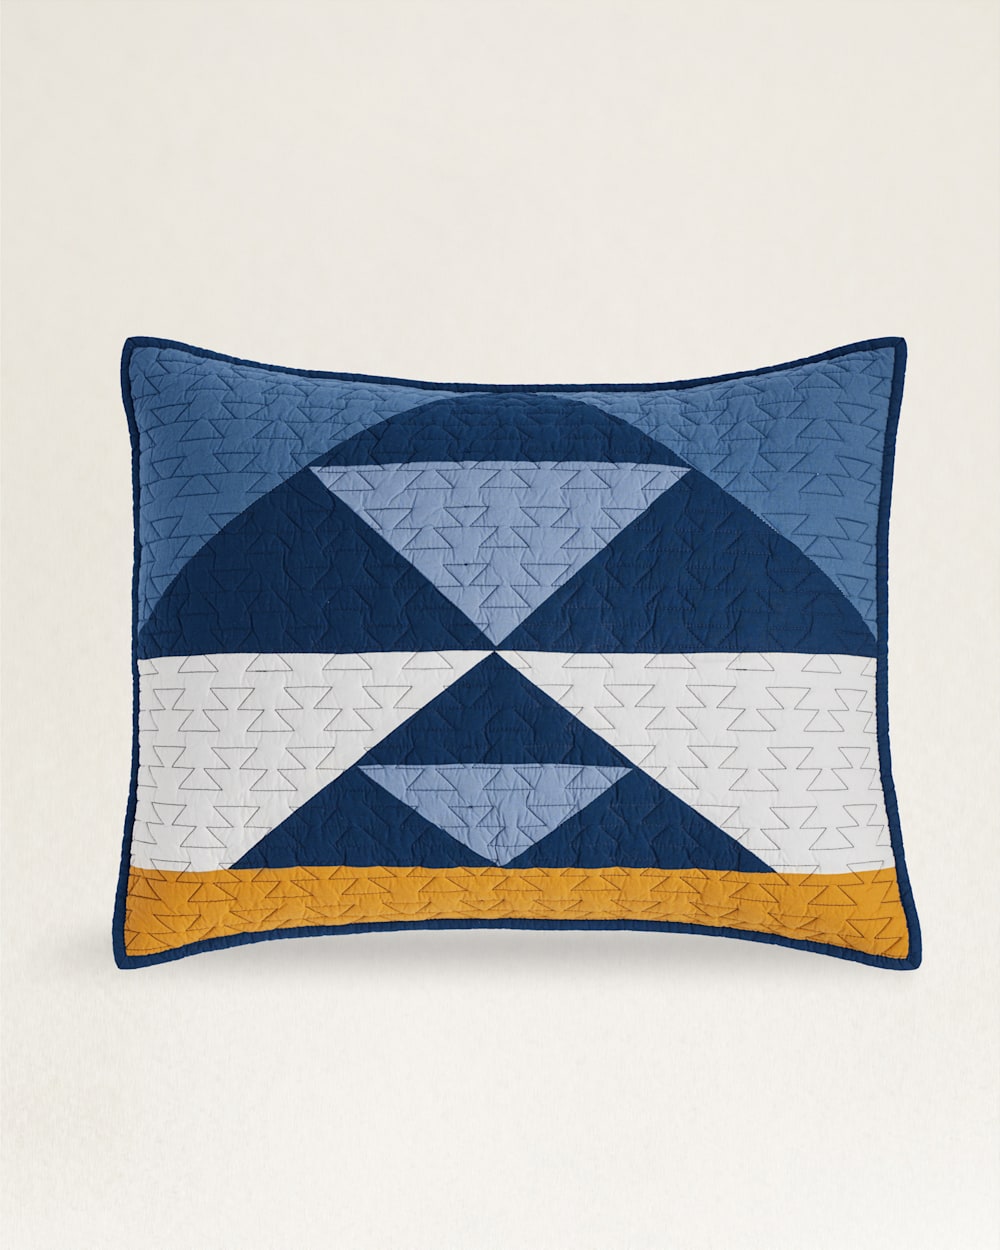 ALTERNATE VIEW OF TRAPPER PEAK PIECED QUILT SET IN BLUE/GOLD image number 5